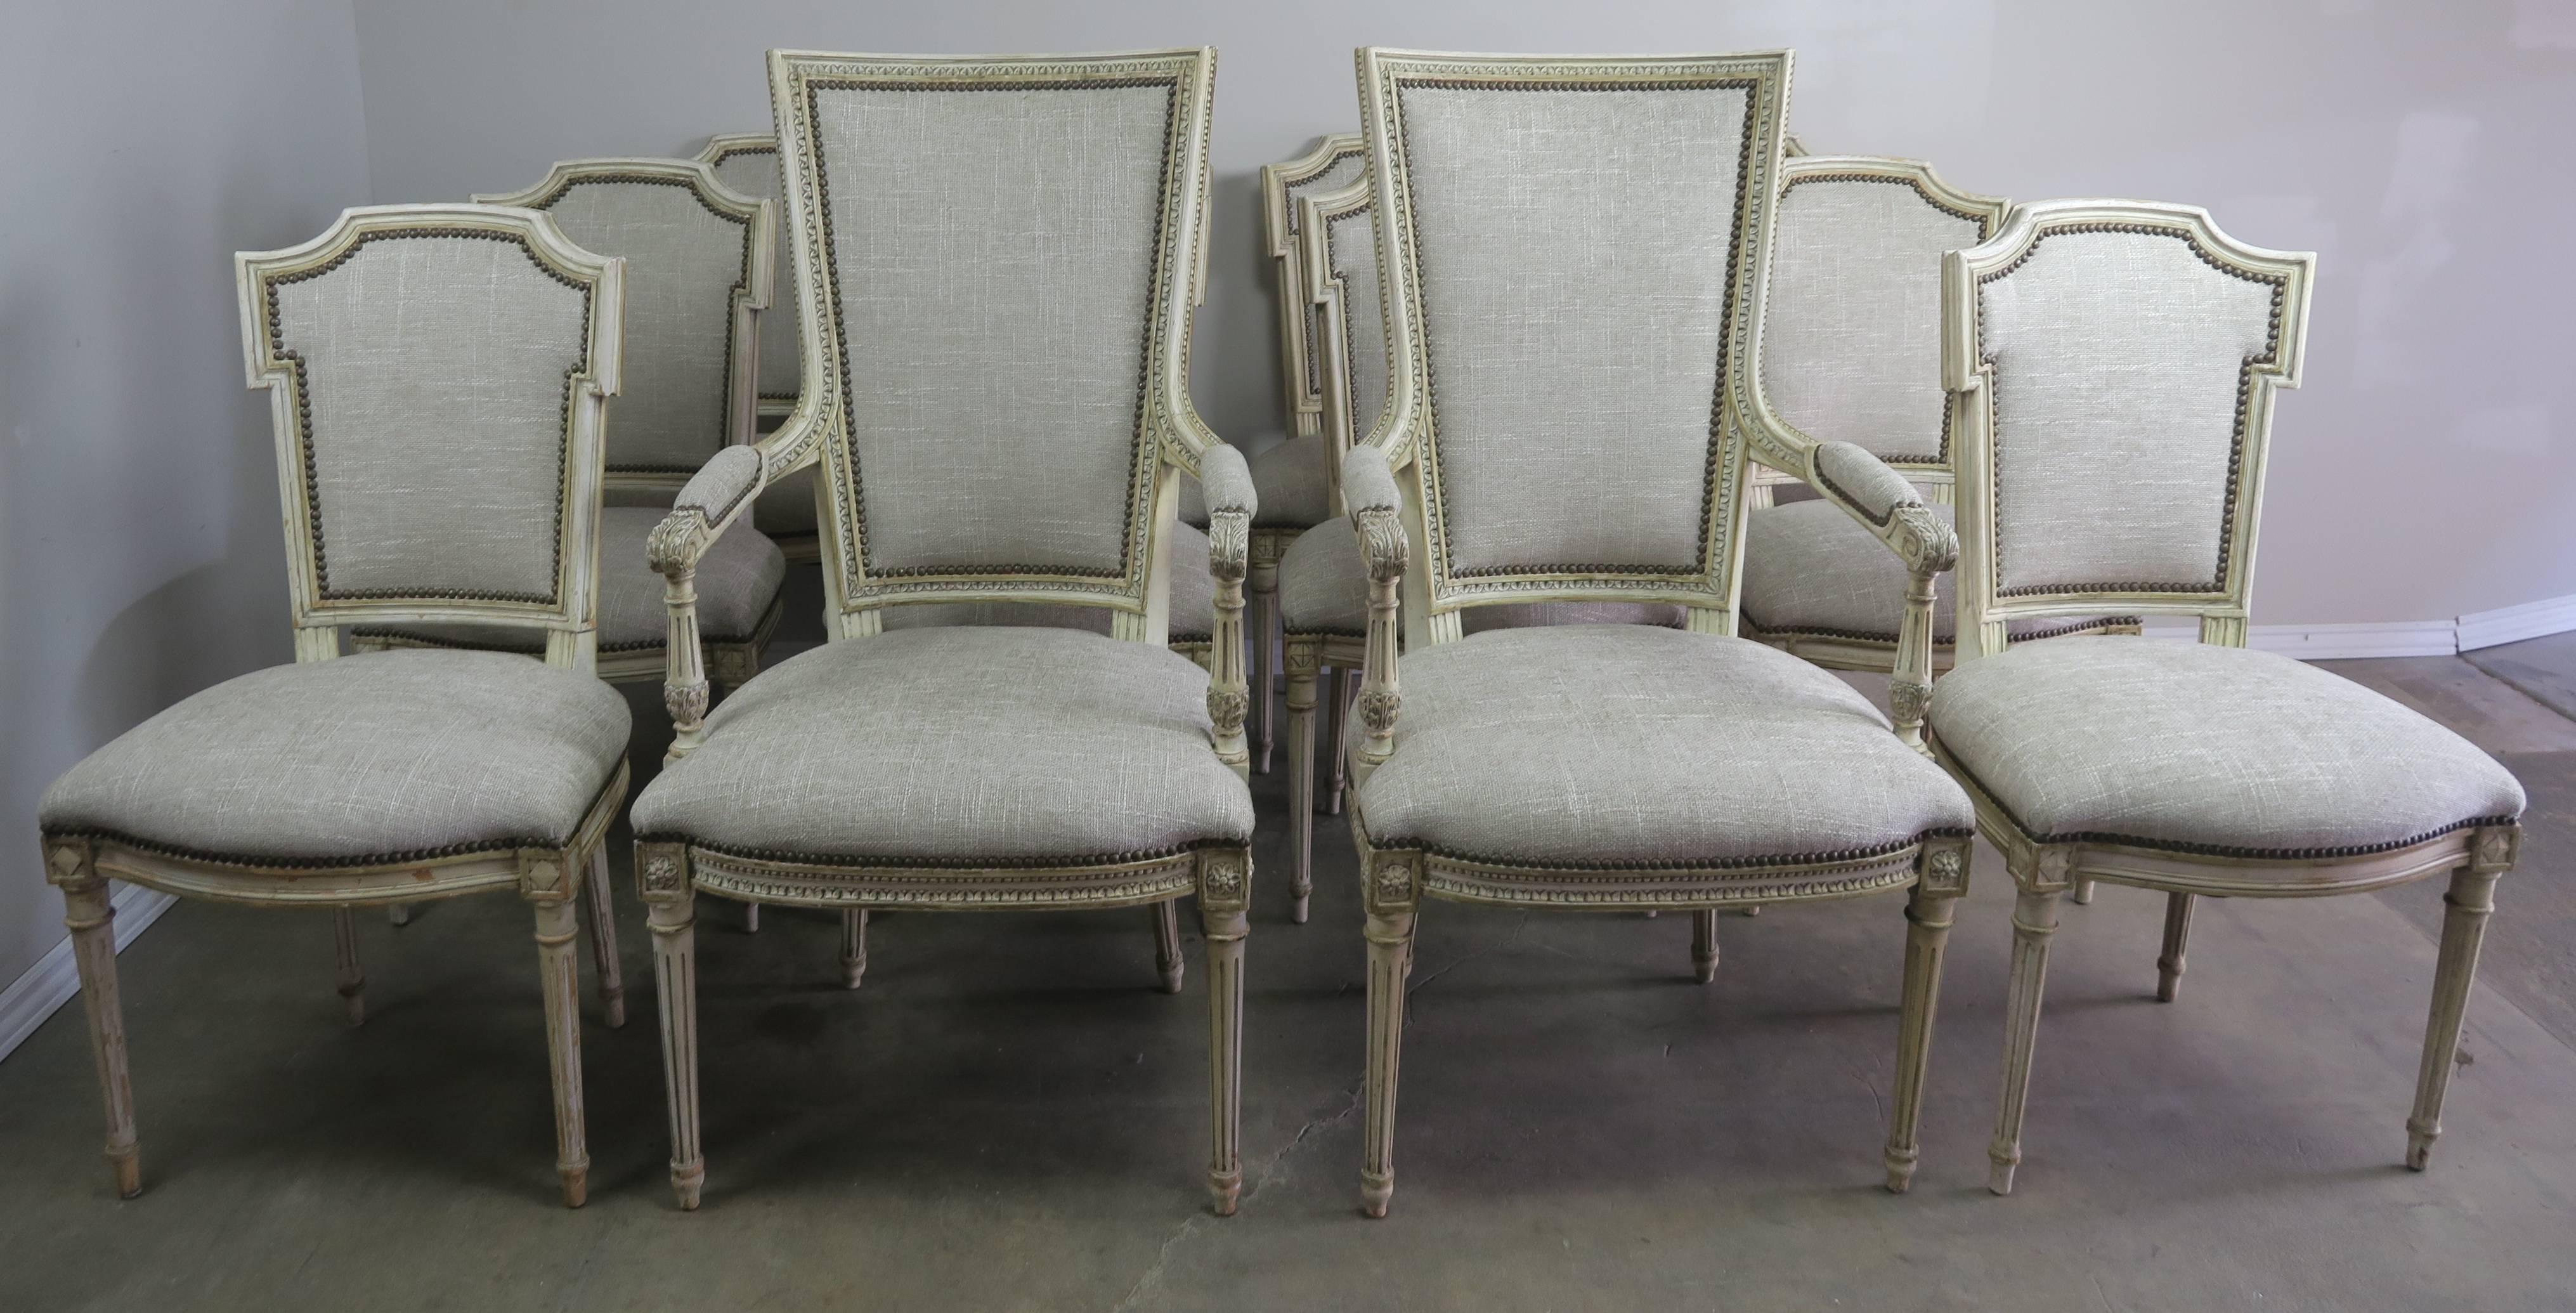 Set of 12 French Louis XVI style cream painted dining room chairs newly upholstered in linen with antique brass nailhead trim detail. The chairs each stand on four fluted straight legs. Size of large armchairs 24